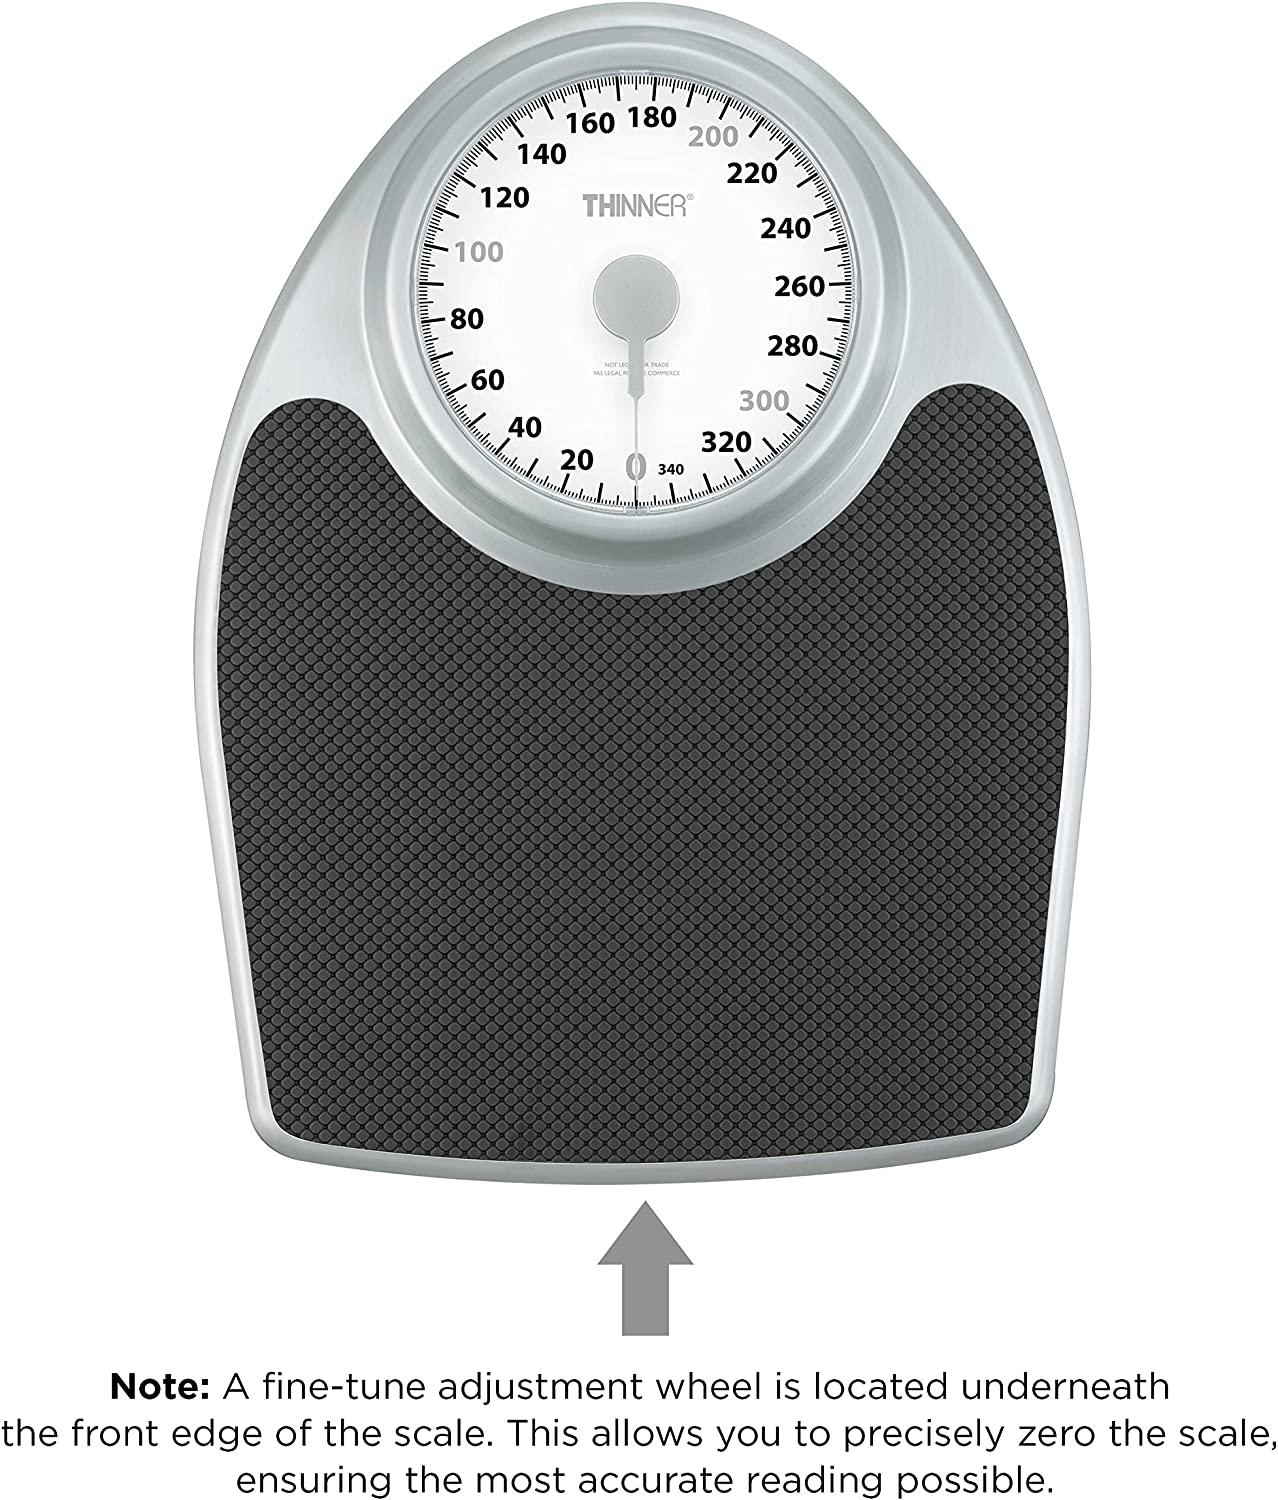 Thinner Extra-Large Dial Analog Precision Bathroom Scale, Analog Bath Scale,  Measures Weight Up to 330 Lbs. All Silver